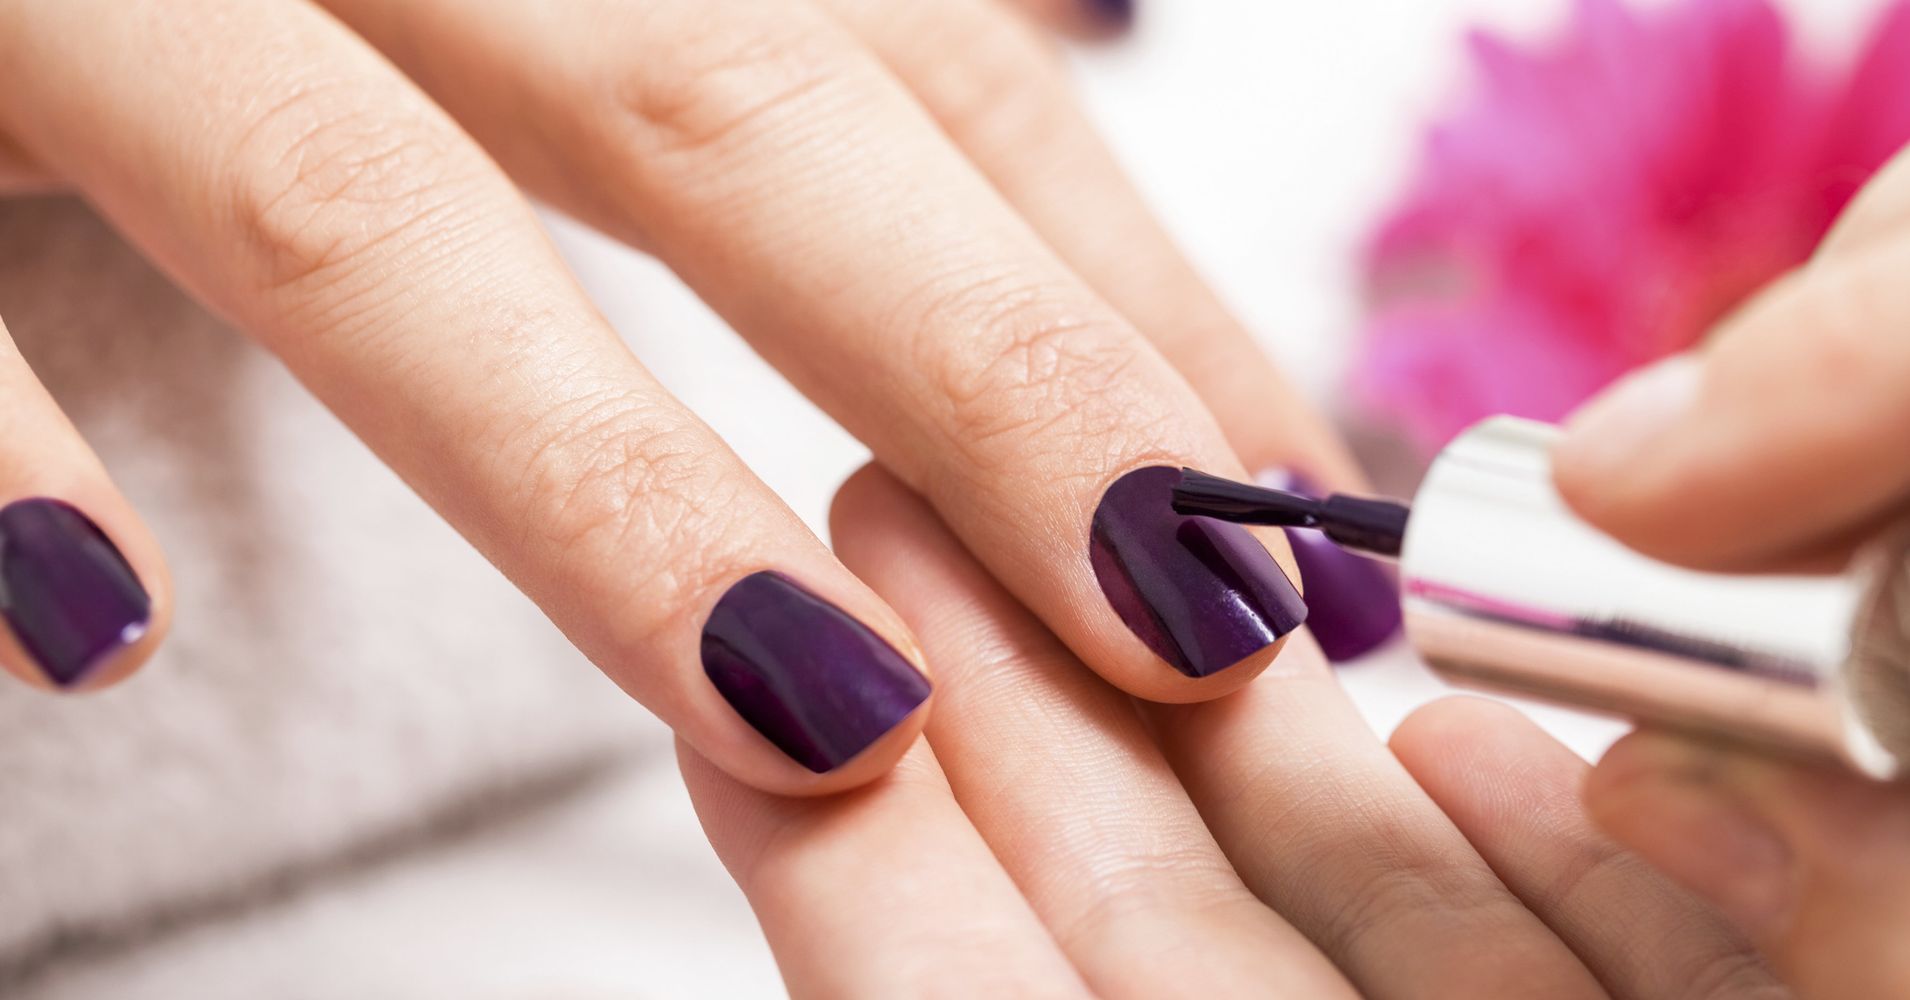 10. "Gorgeous Dark Nail Polish Colors for a Bold and Edgy Look" - wide 10